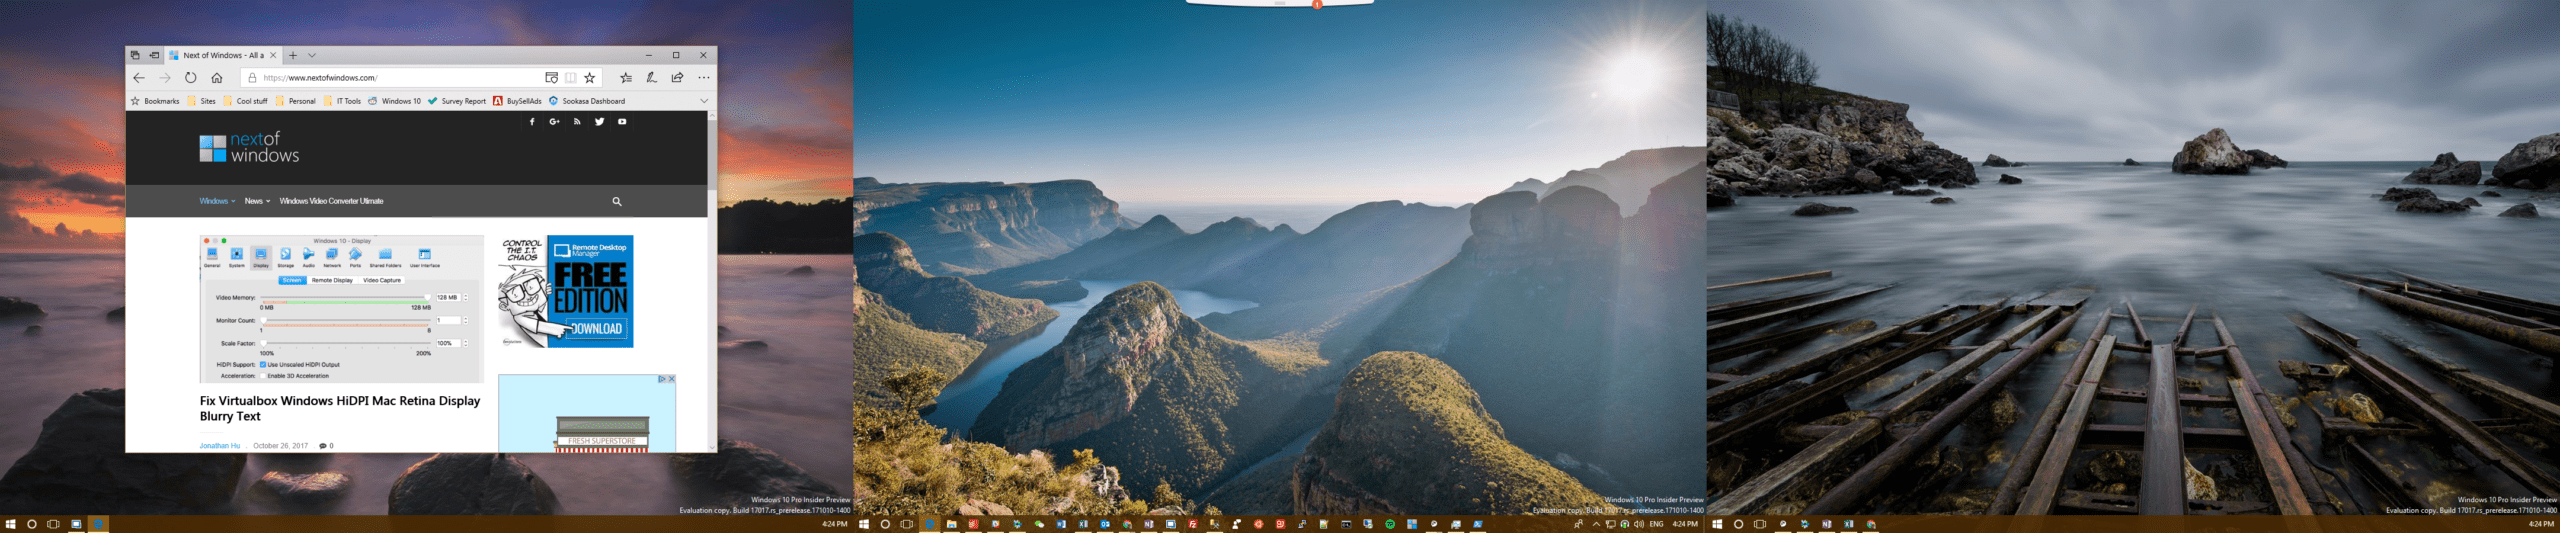 Screenshot 1 - Windows 10 Tip: How To Quickly Move One Window from One Screen to Another